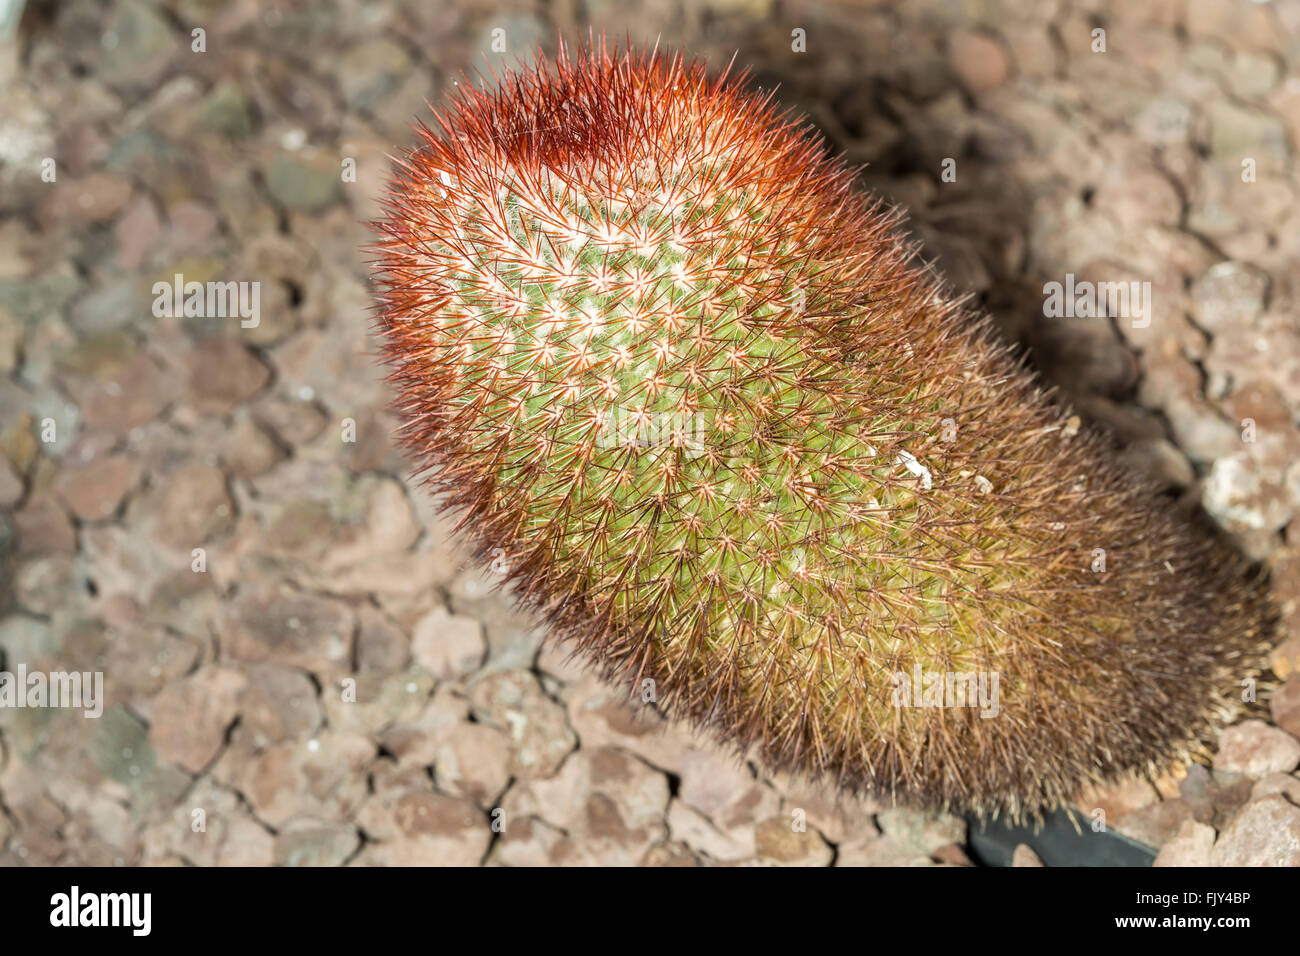 View of a spiny pincushion cactus or Mammillaria spinosissima, a type of succulent plant endemic to the central Mexico Stock Photo